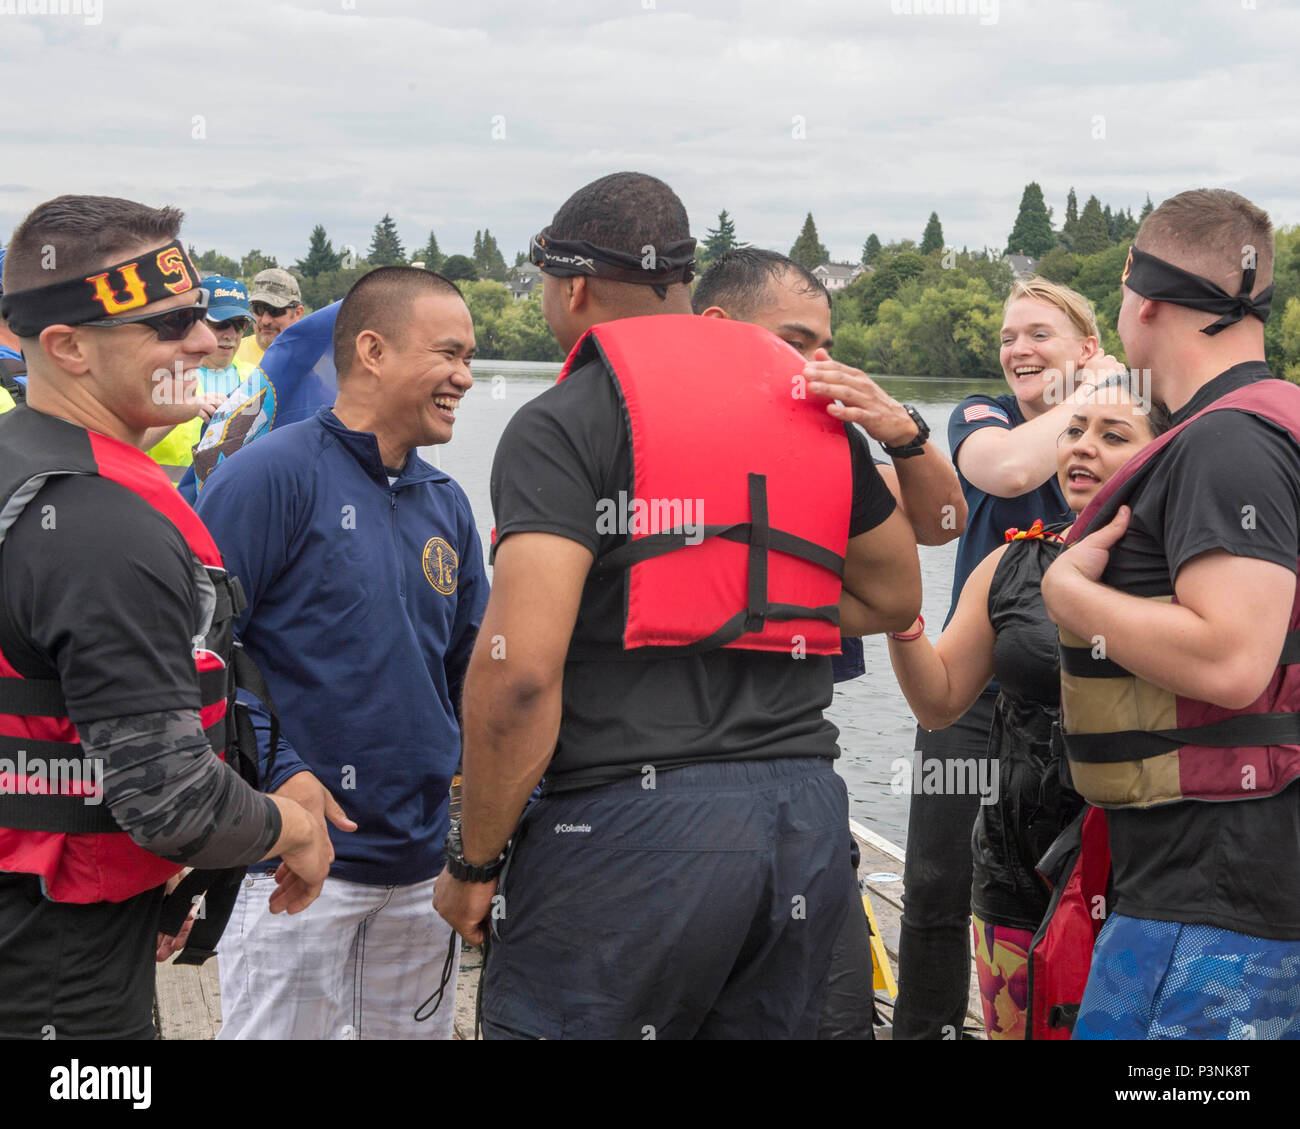 160716-N-LQ926-435 SEATTLE, Wash. (July 16, 2016) -- Sailors assigned to Navy Region Northwest and Marines from Combat Logistic Battalion 23, out of Joint Base Lewis-McCord congratulate each other after the Albertsons/Safeway Seafair Milk Carton Derby military race held at the Green Lake Aqua Theater in Seattle. The event is part of the annual Seattle Seafair maritime summer celebration. (U.S. Navy photo by Mass Communication Specialist 2nd Class Alex Van’tLeven/Released) Stock Photo